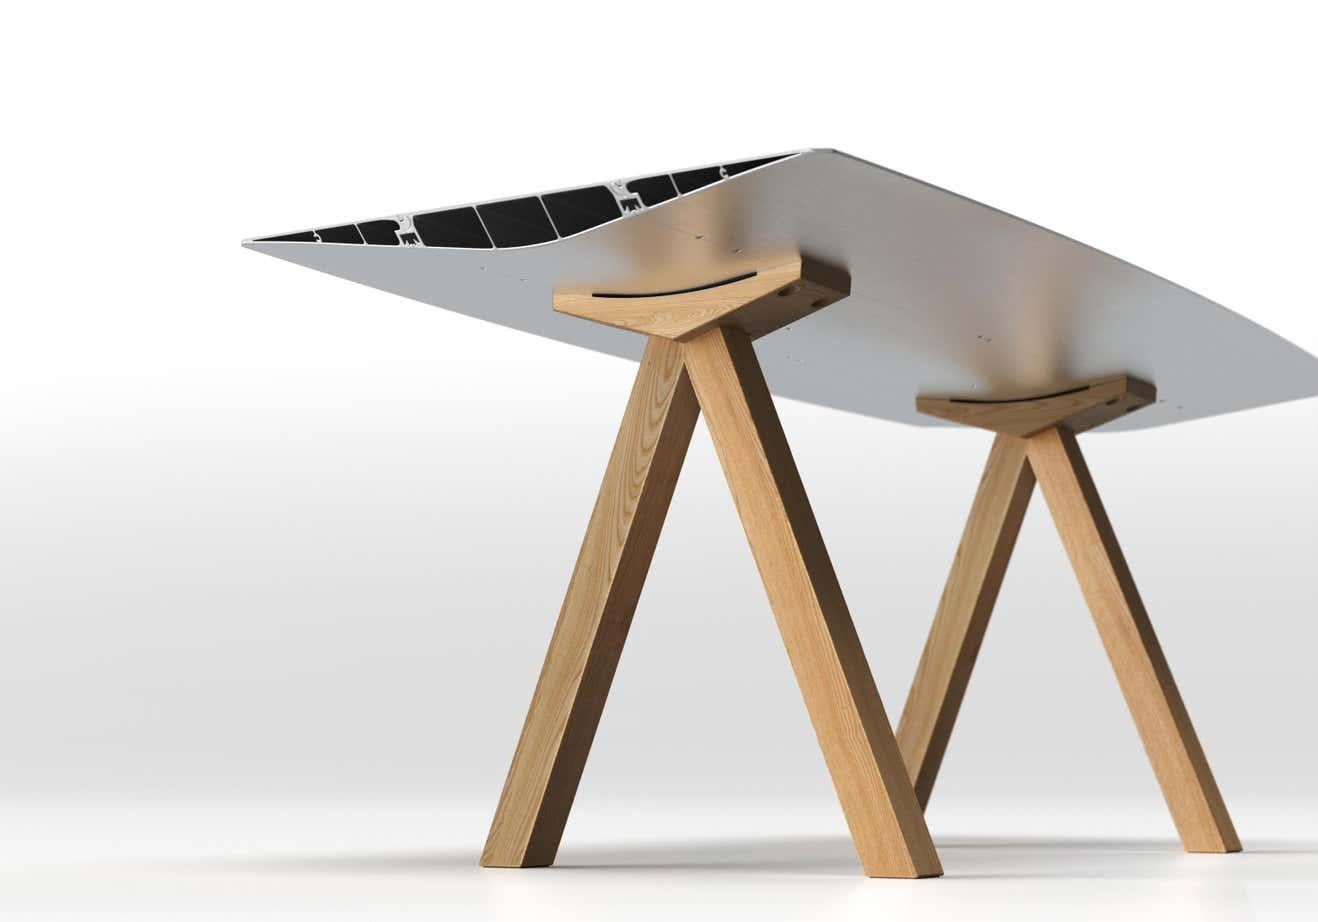 Dinning Table B 90cm x 220cm Aluminum Anodized Silver Top Wooden legs

Materials: 
Aluminium, oak, ash

Dimensions: 
D 90 cm x W 220 cm x H 74 cm

The Table B, which inaugurated the Extrusions Collection in 2009, can reach up to five metres